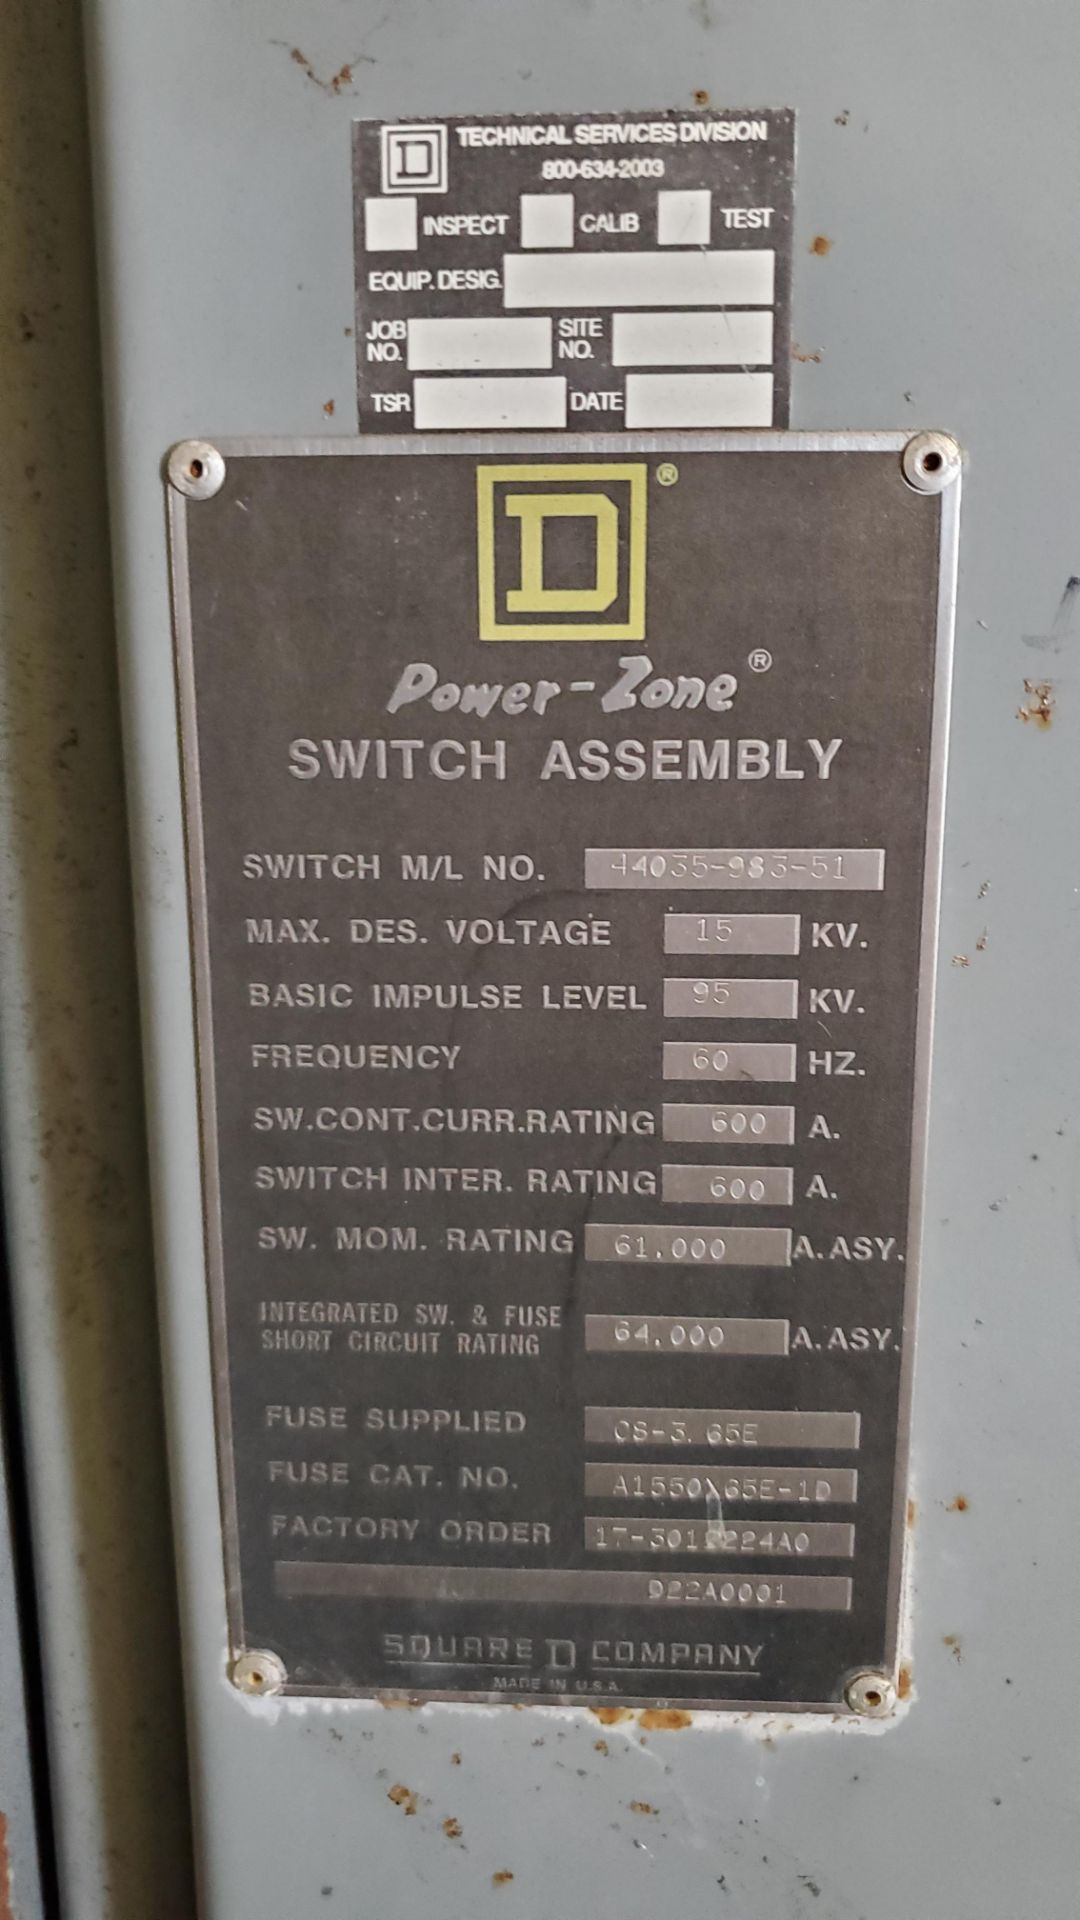 Square D Power Zone Load Interruptor, 15KV, 600A 30 (LOADING FEES: $100) - Image 2 of 2